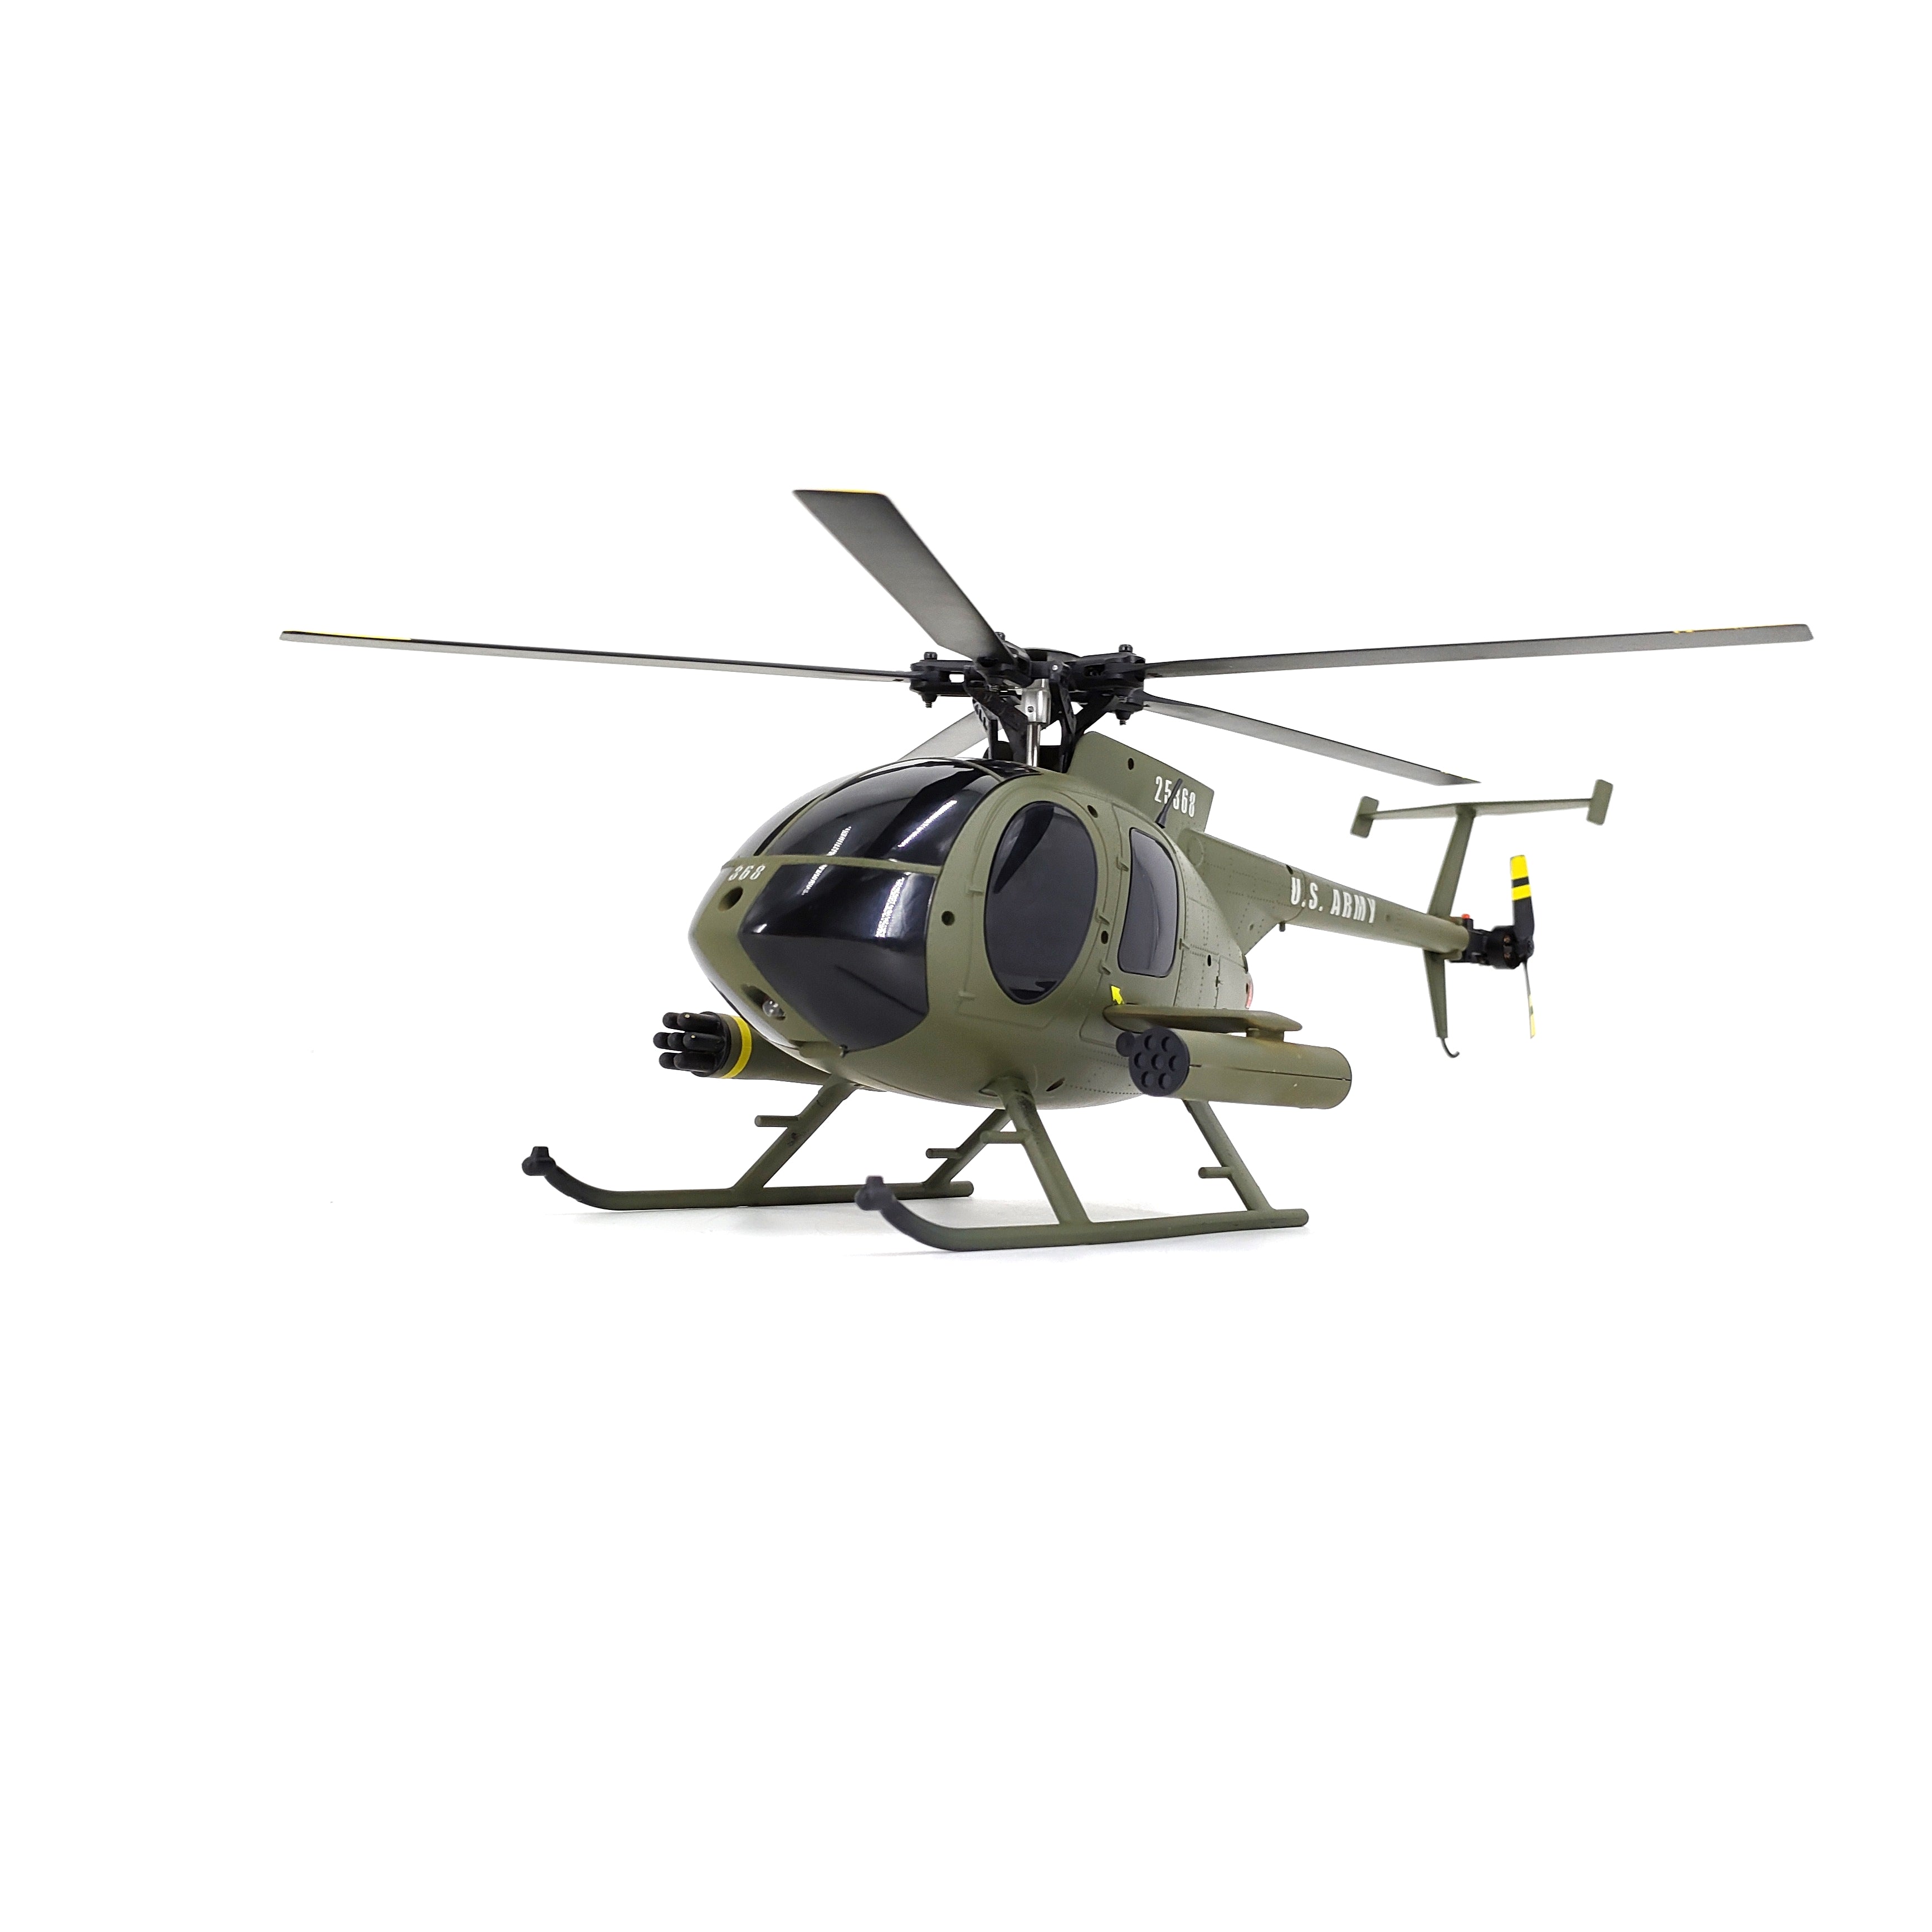 RC ERA C189 MD500 2.4G 4CH 1:28 UAV Altitude Hold Single Blade Flybarless RC Helicopter RTF - Makerfire